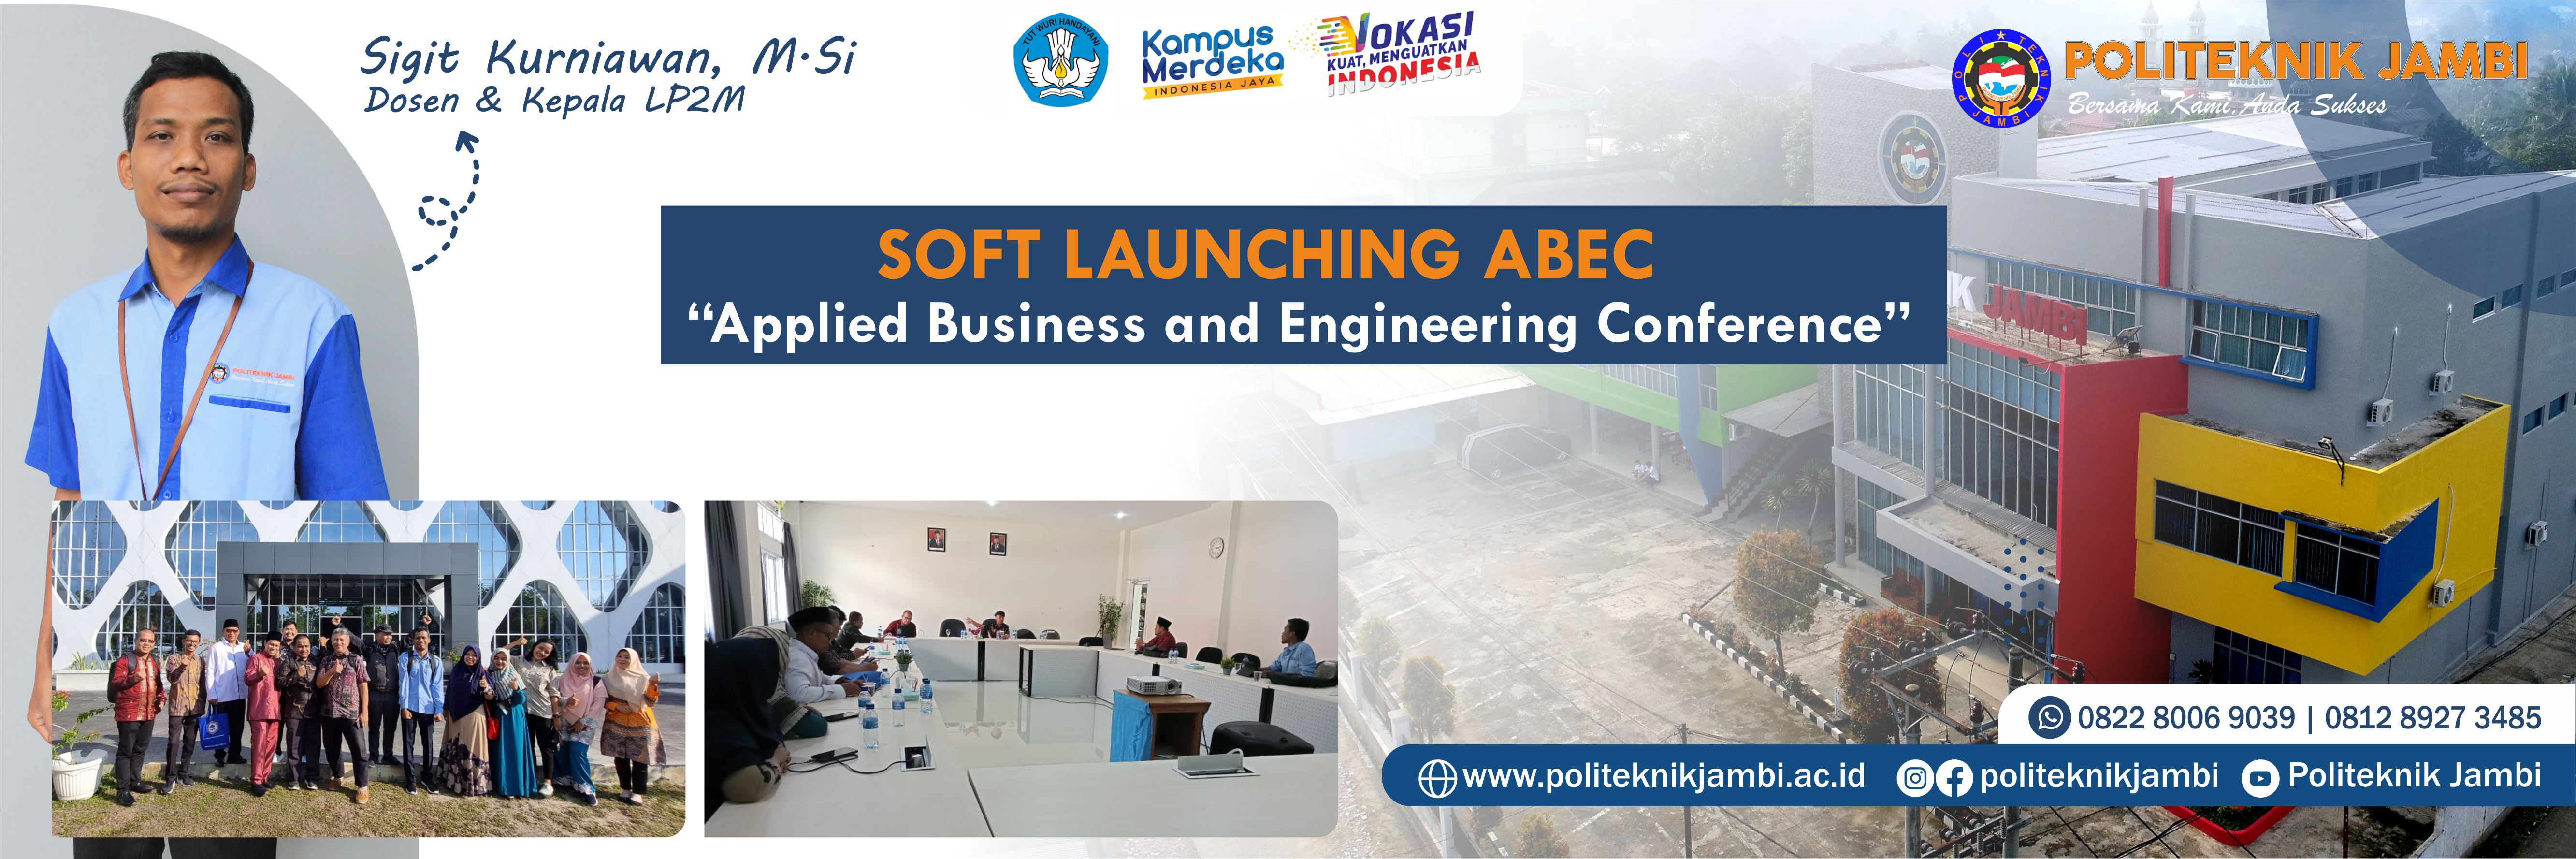 Soft Launching Applied Business and Engineering Conference (ABEC)